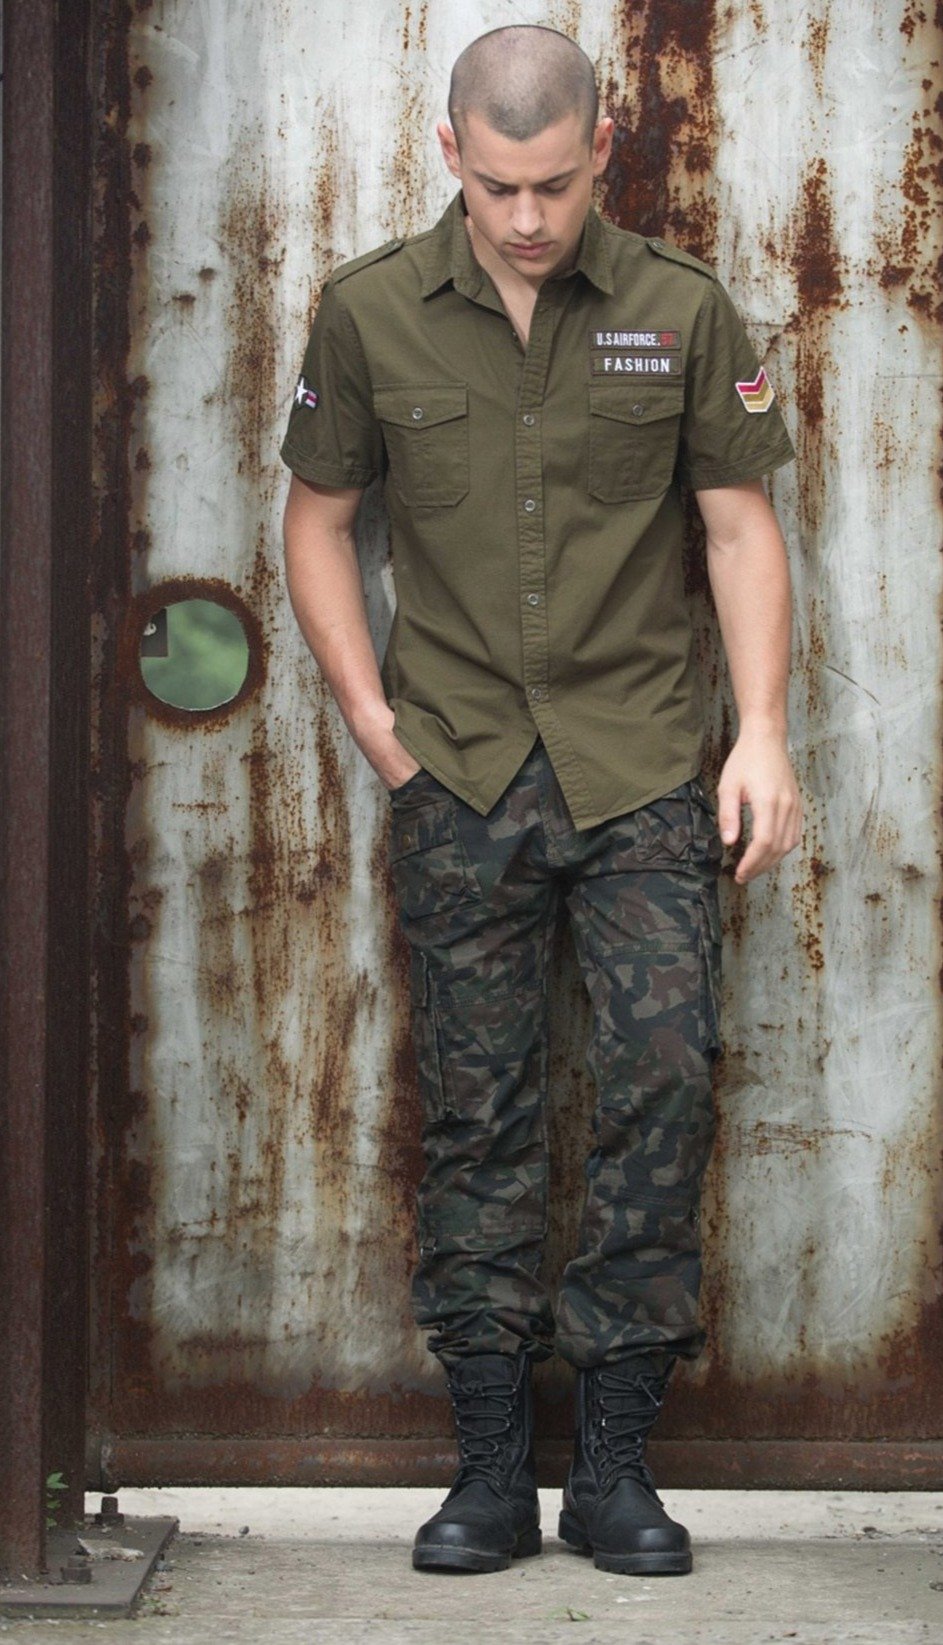 CLEARANCE / Military Shirts in Alternative Fashion Men Cotton Short Sleeve Casual Slim Fit - HARD'N'HEAVY